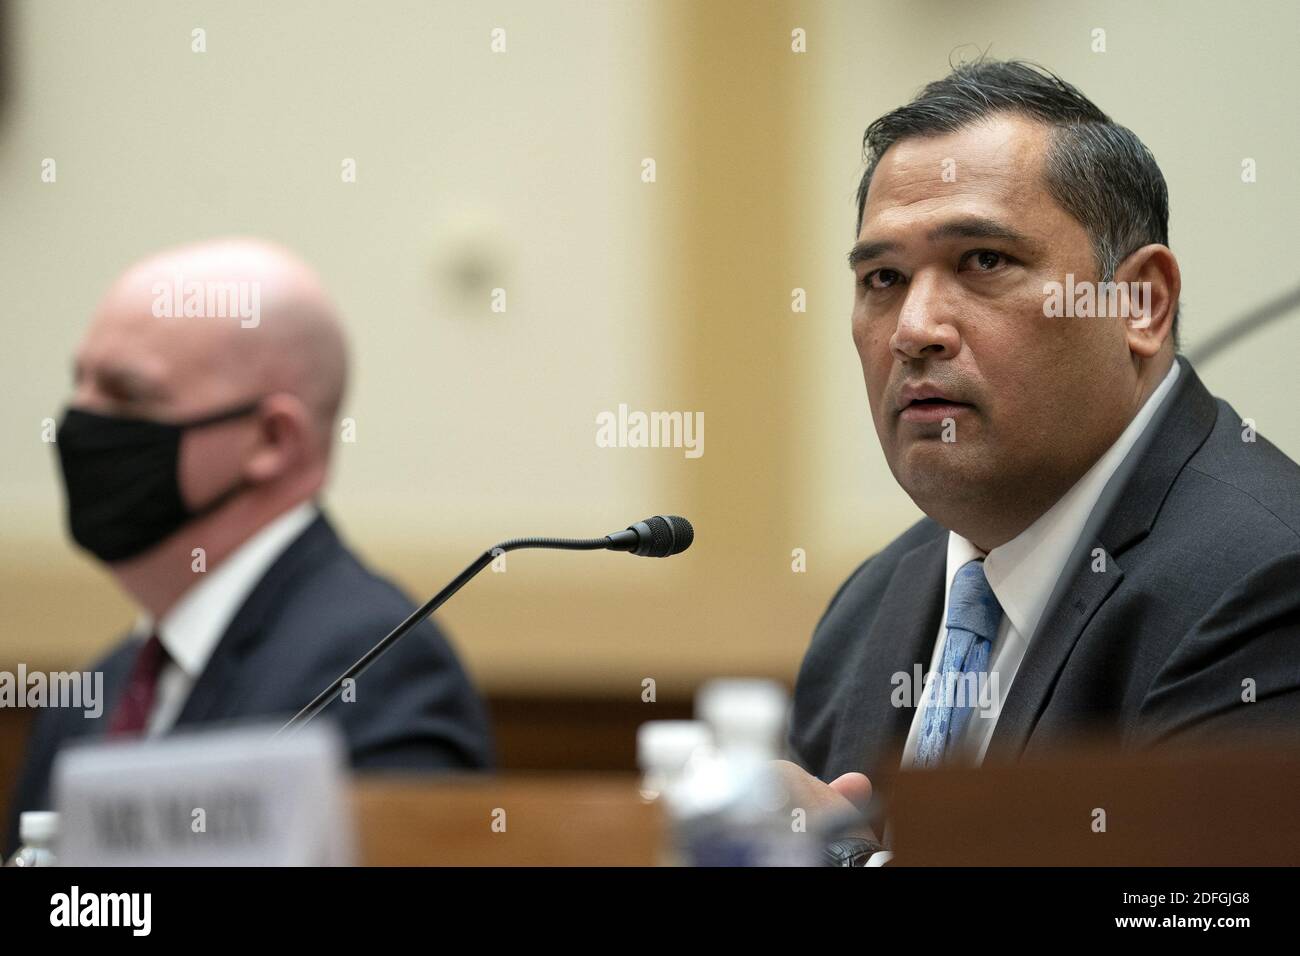 Brian Bulatao, under secretary of state for management at the U.S. Department of State, right, speaks during a House Foreign Affairs Committee hearing in Washington, D.C., U.S., on Wednesday, Sept. 16, 2020. The hearing is investigating the firing of State Department Inspector General Steve Linick. Photo by Stefani Reynolds/Pool/ABACAPRESS.COM Stock Photo